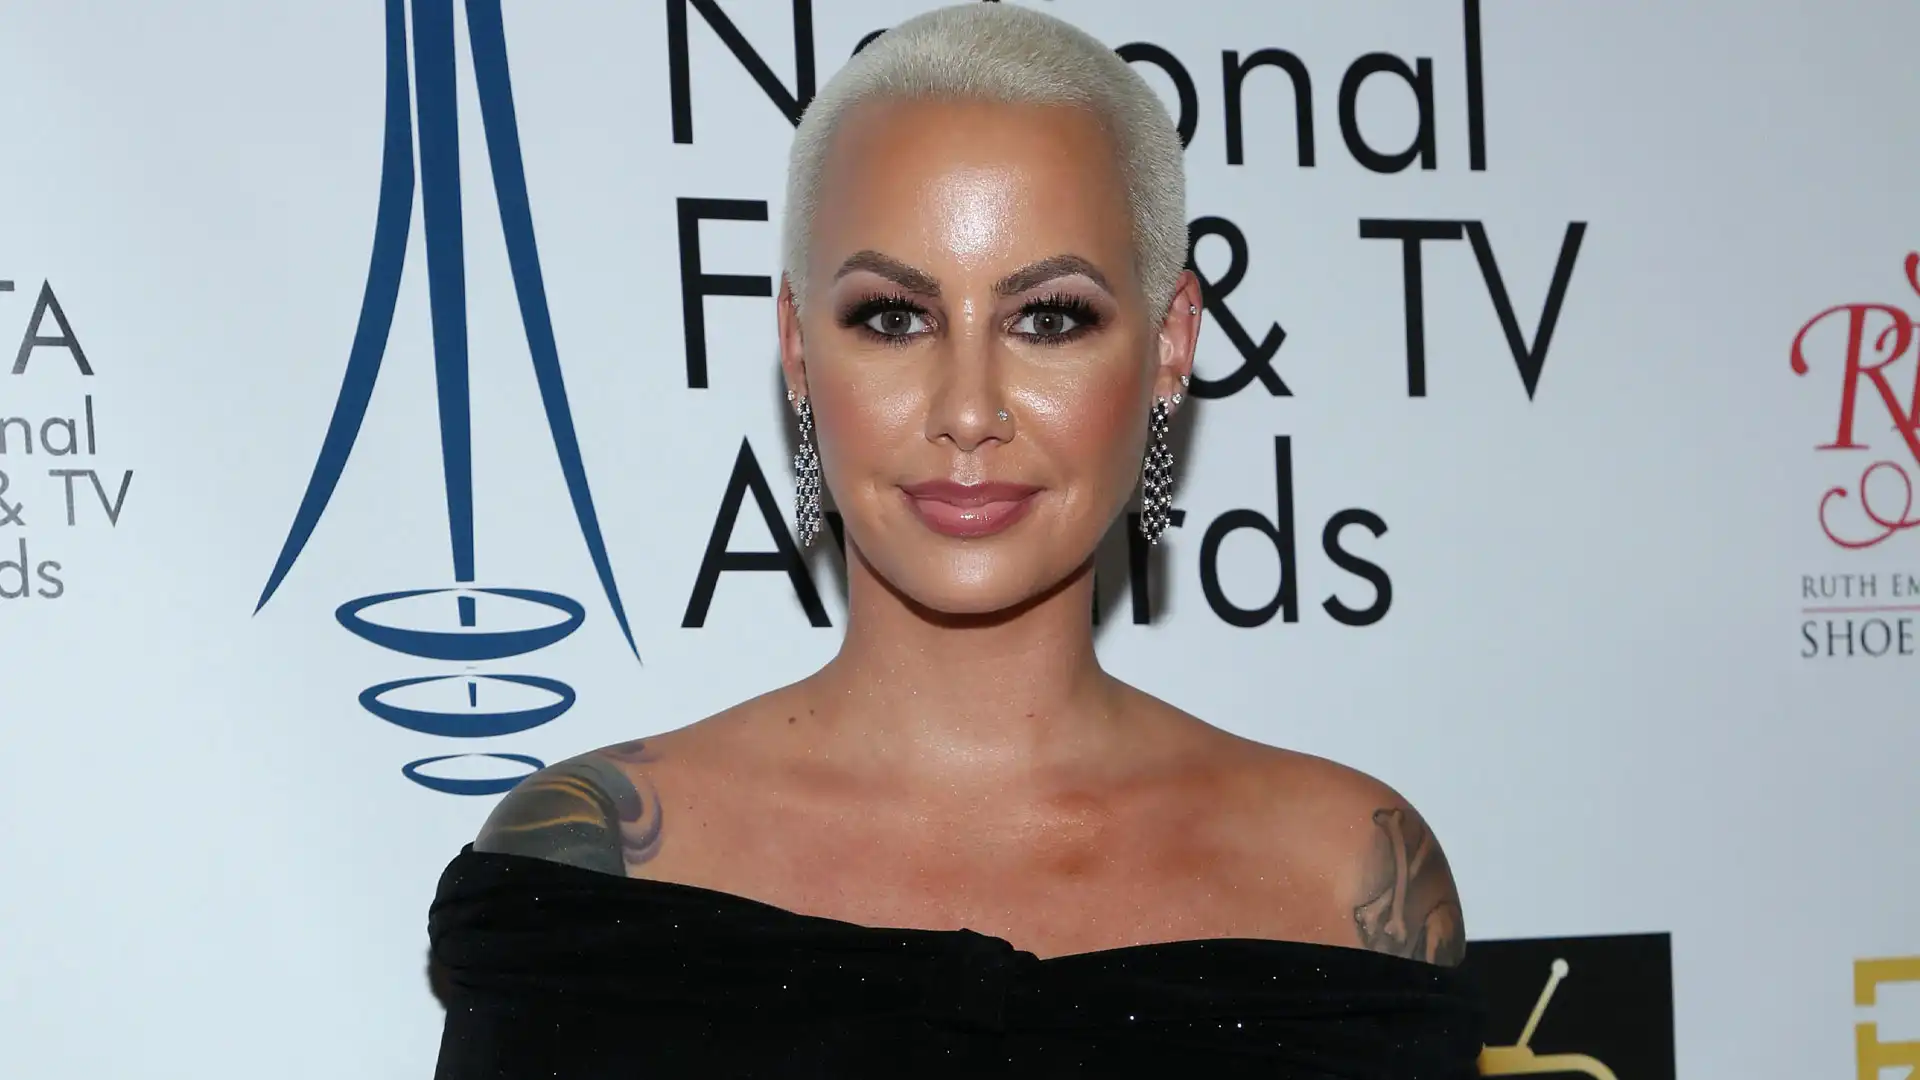 Amber Rose controversial moments Kanye lies Trump selfie